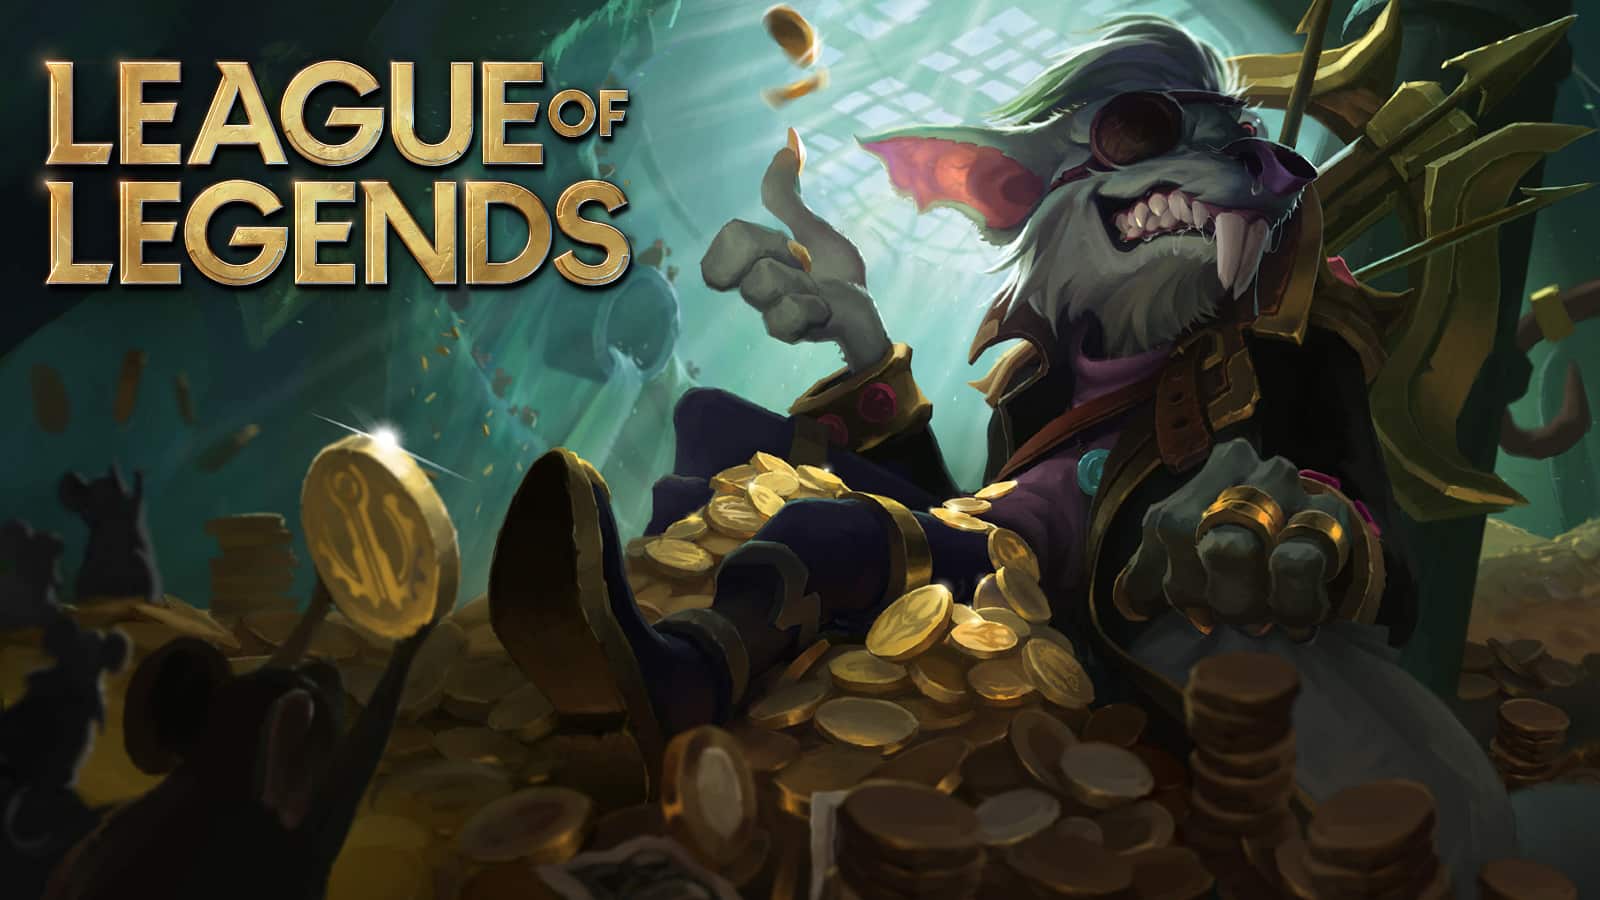 How to Link your Twitch Prime to Your League of Legends account in 2023  (FREE RP!!) 